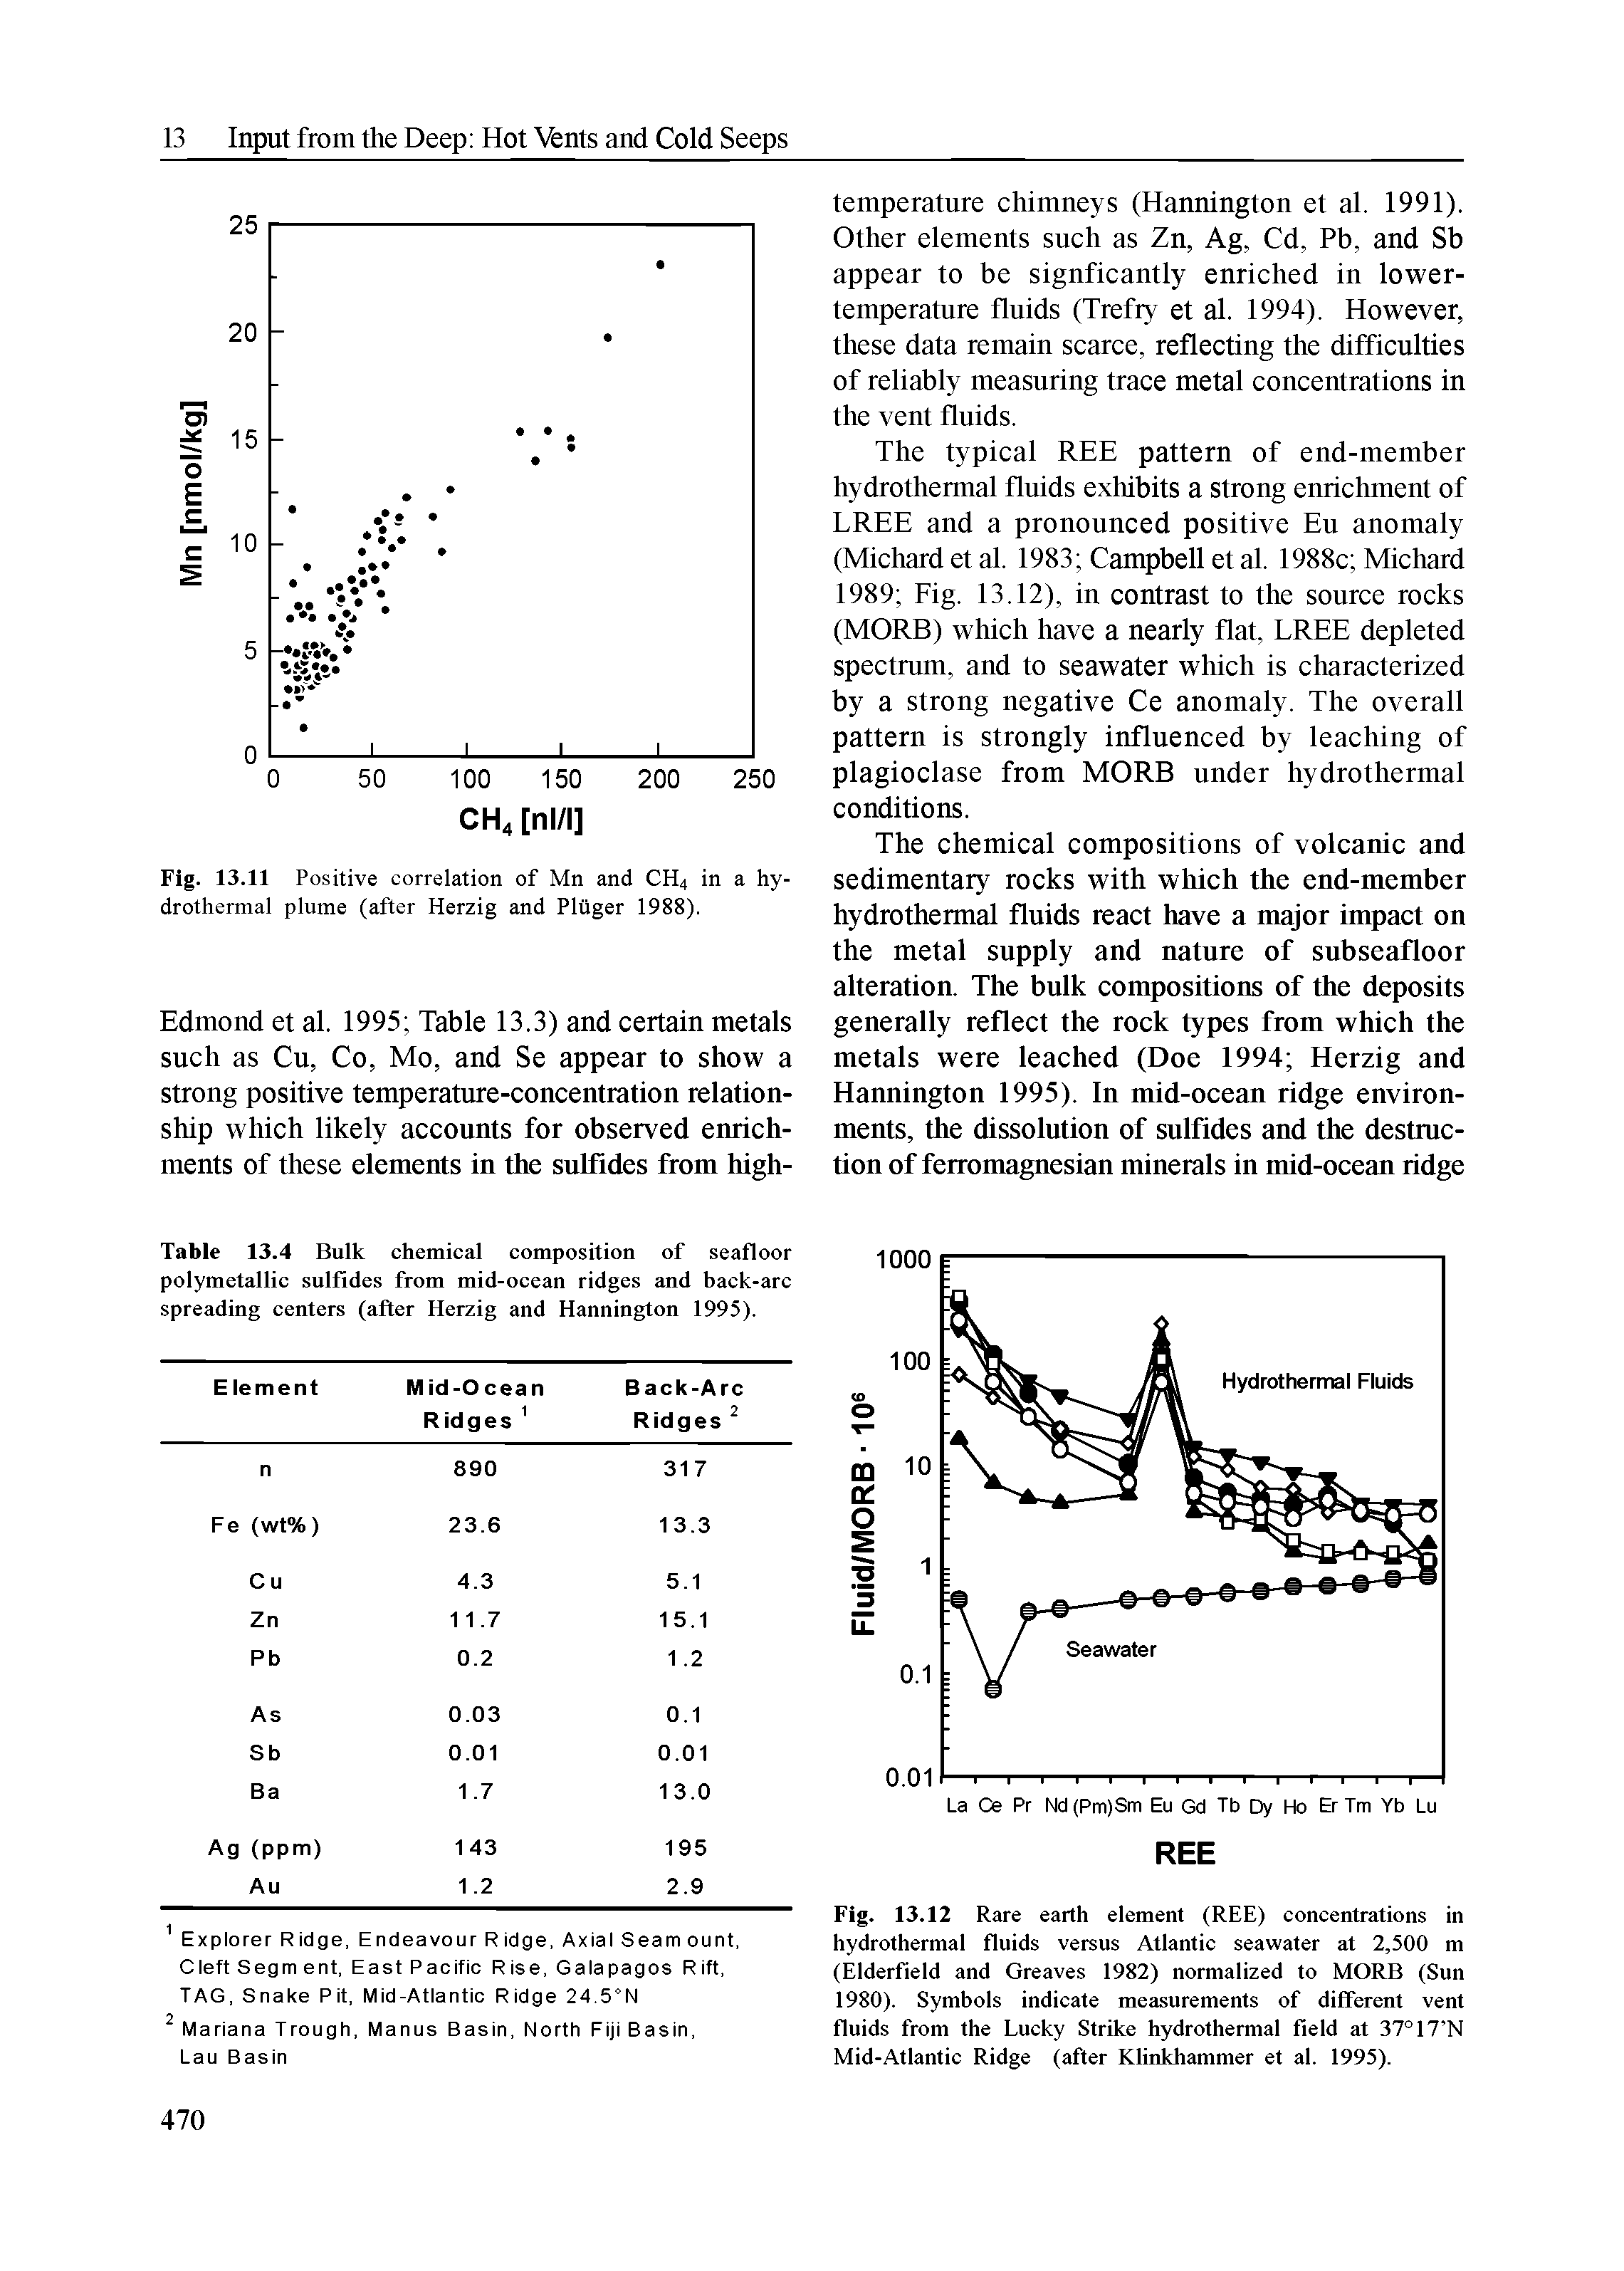 Fig. 13.12 Rare earth element (REE) concentrations in hydrothermal fluids versus Atlantic seawater at 2,500 m (Elderfield and Greaves 1982) normalized to MORE (Sun 1980). Symbols indicate measurements of different vent fluids from the Lucky Strike hydrothermal field at 37°17 N Mid-Atlantic Ridge (after Klinkhammer et al. 1995).